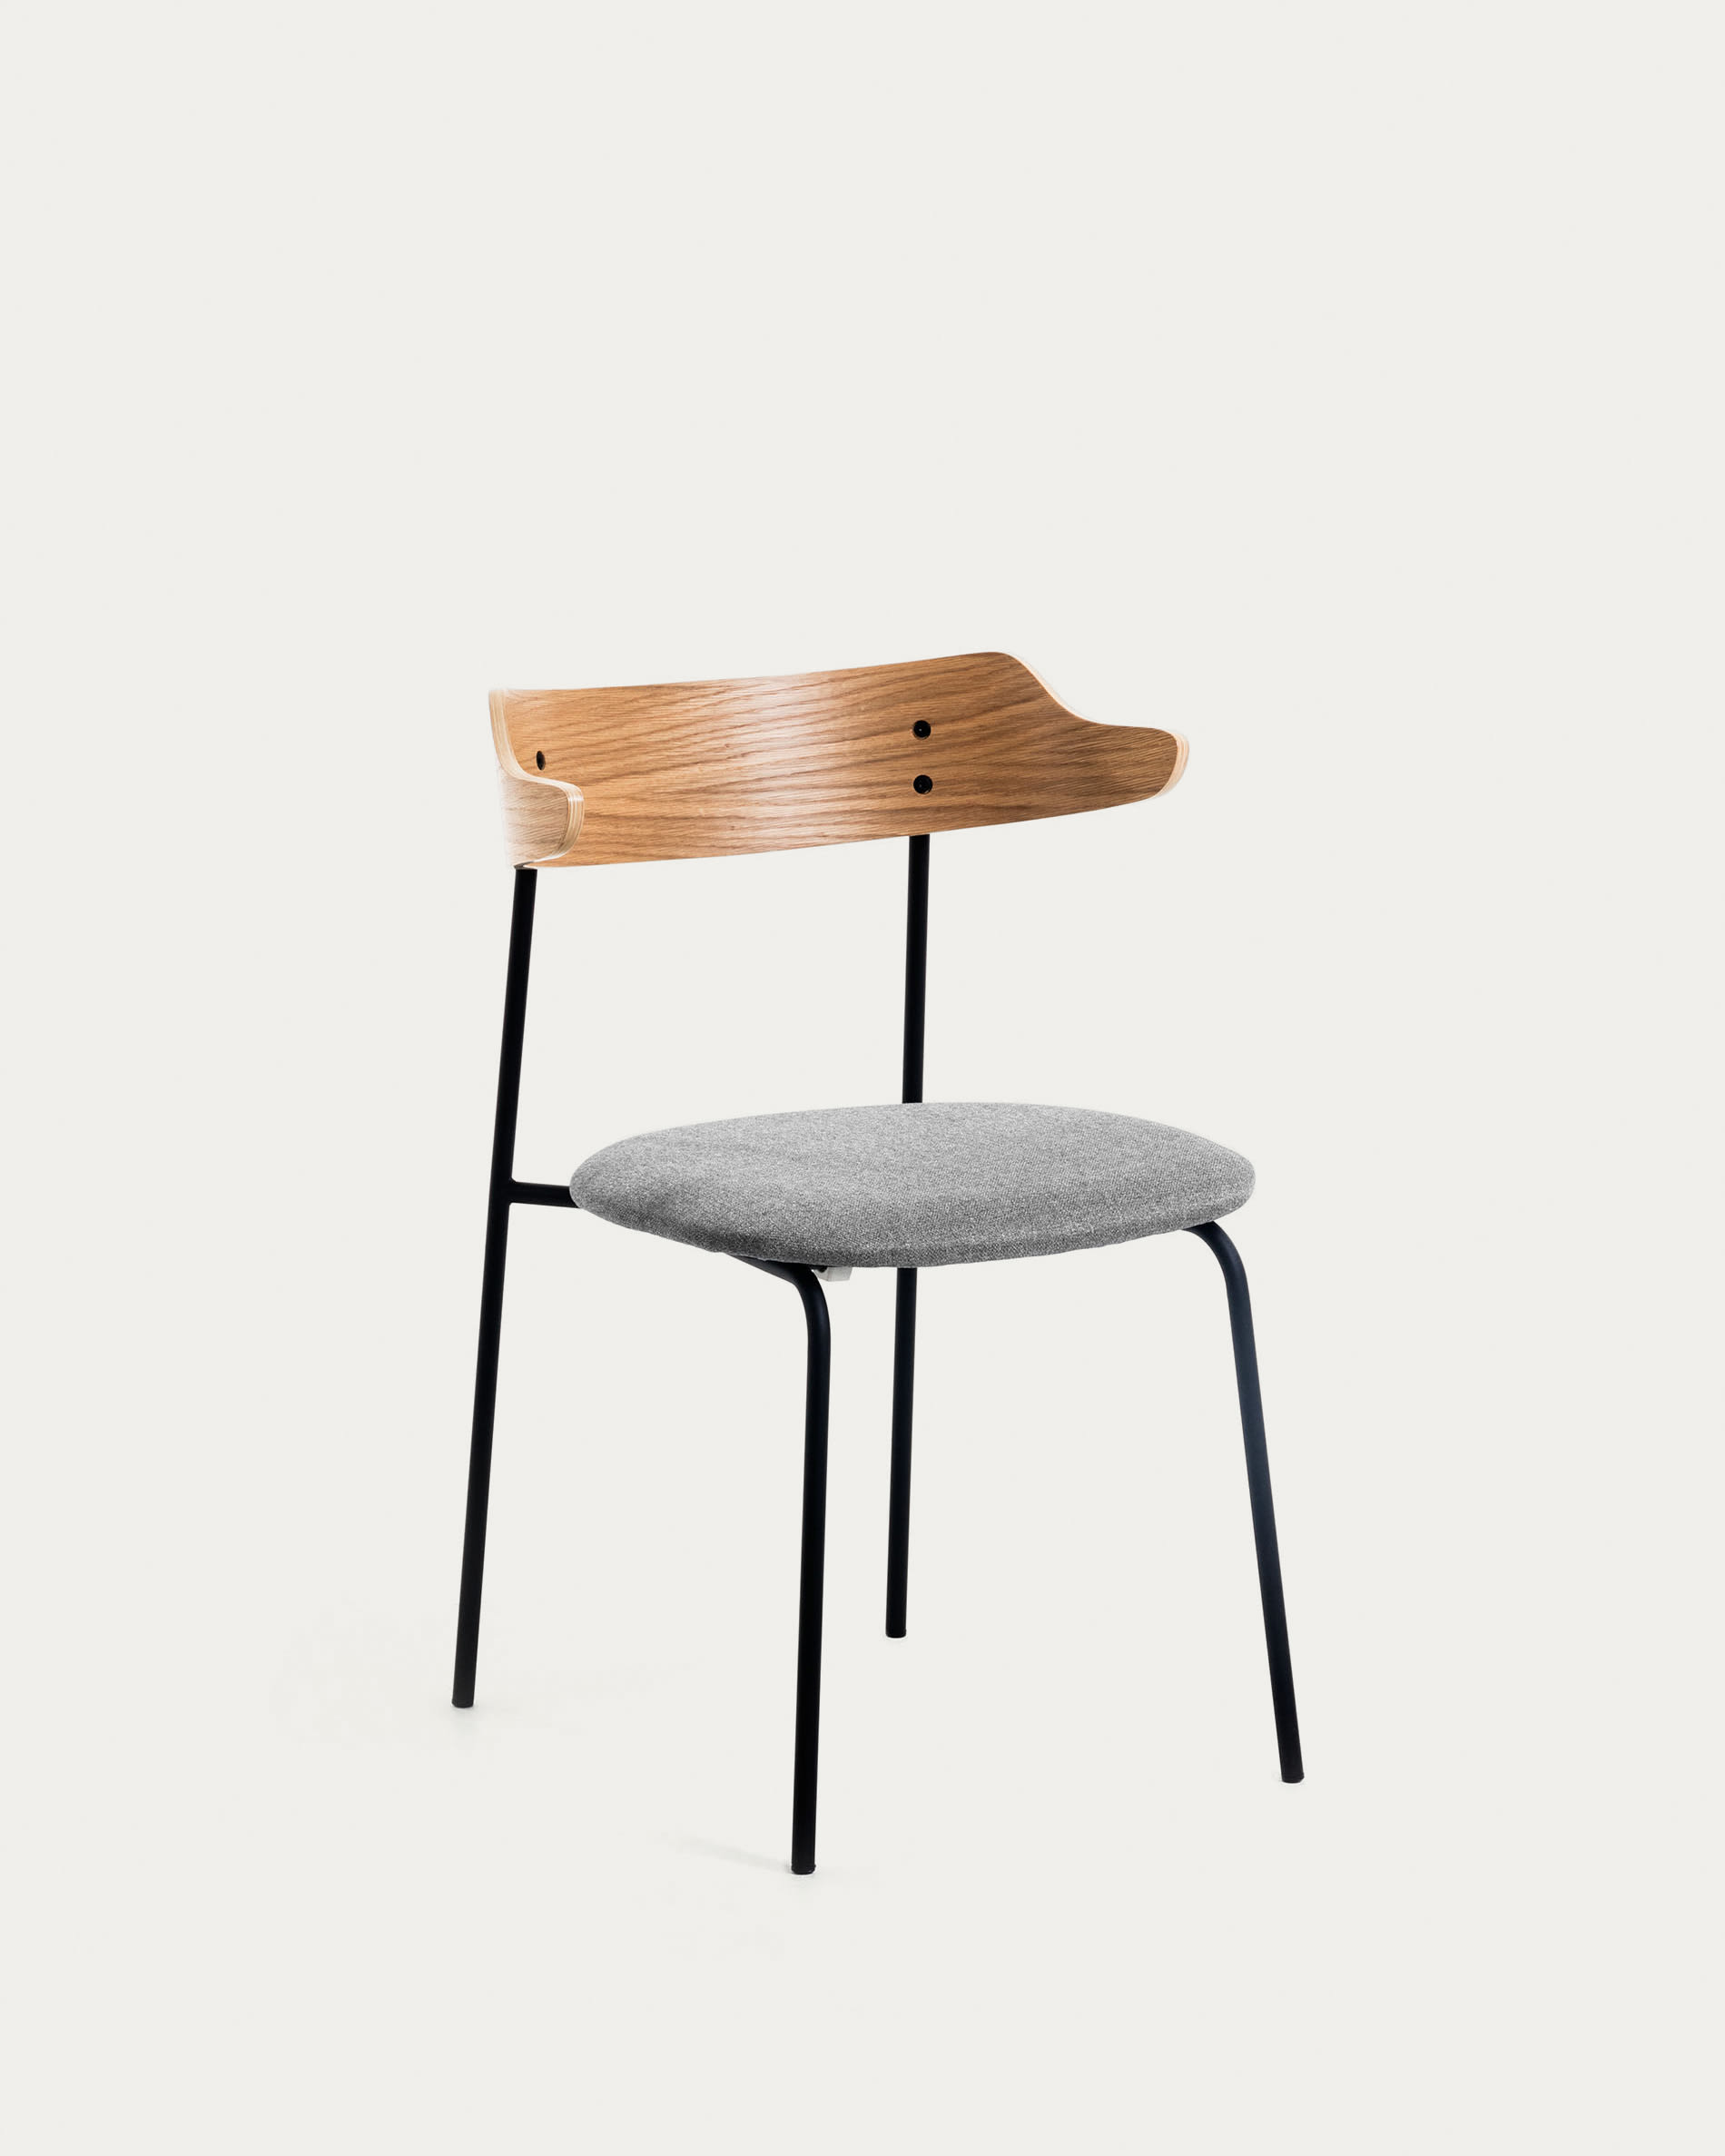 Olympia stackable chair in oak veneer and steel with black finish